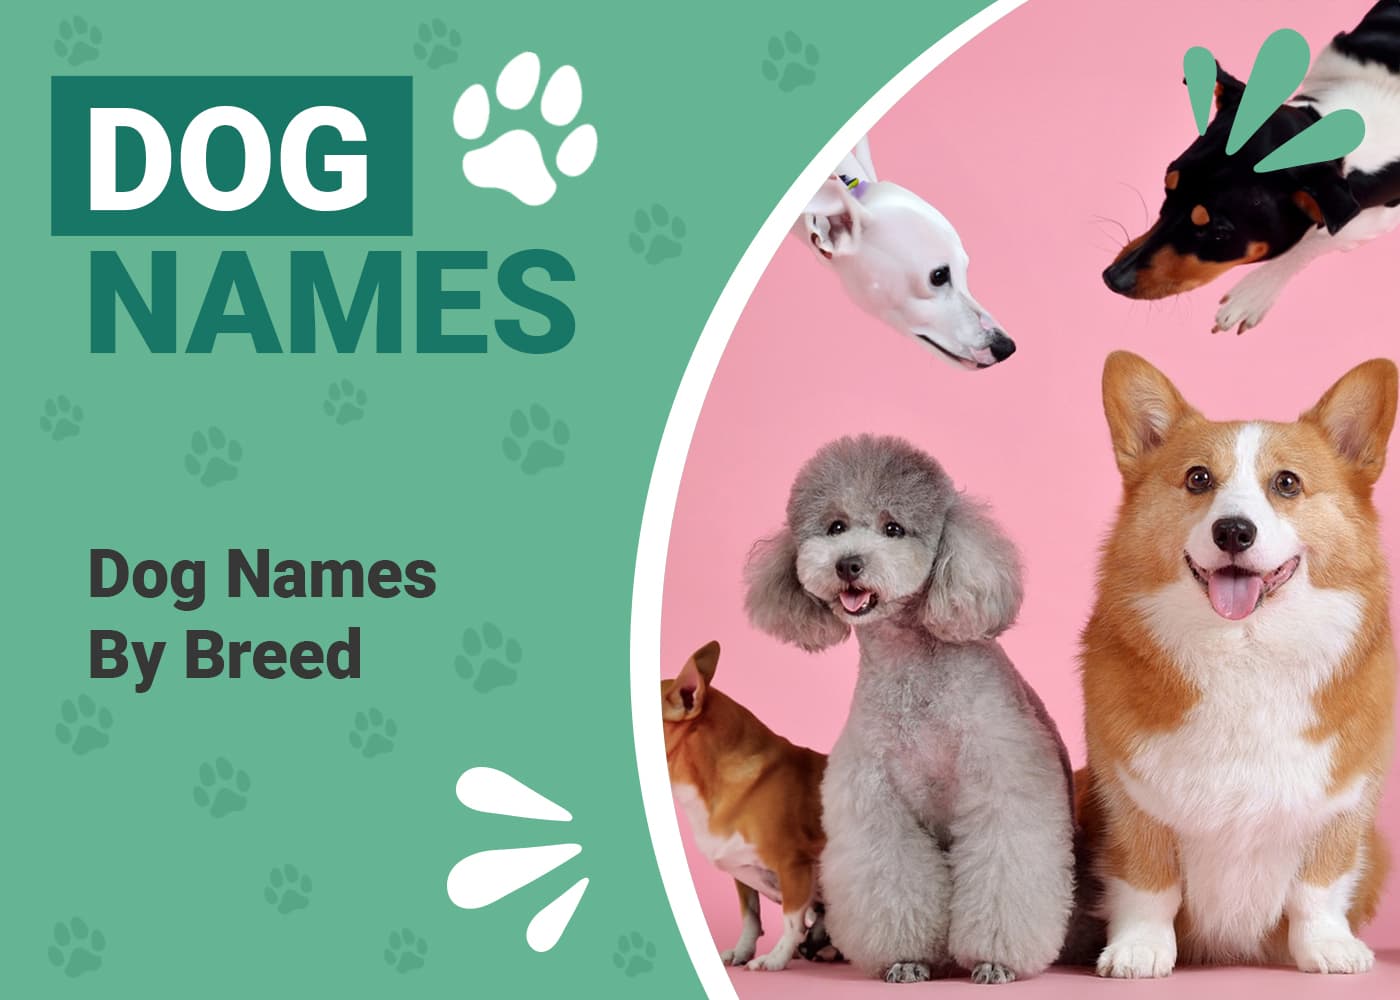 Dog Names by Breed